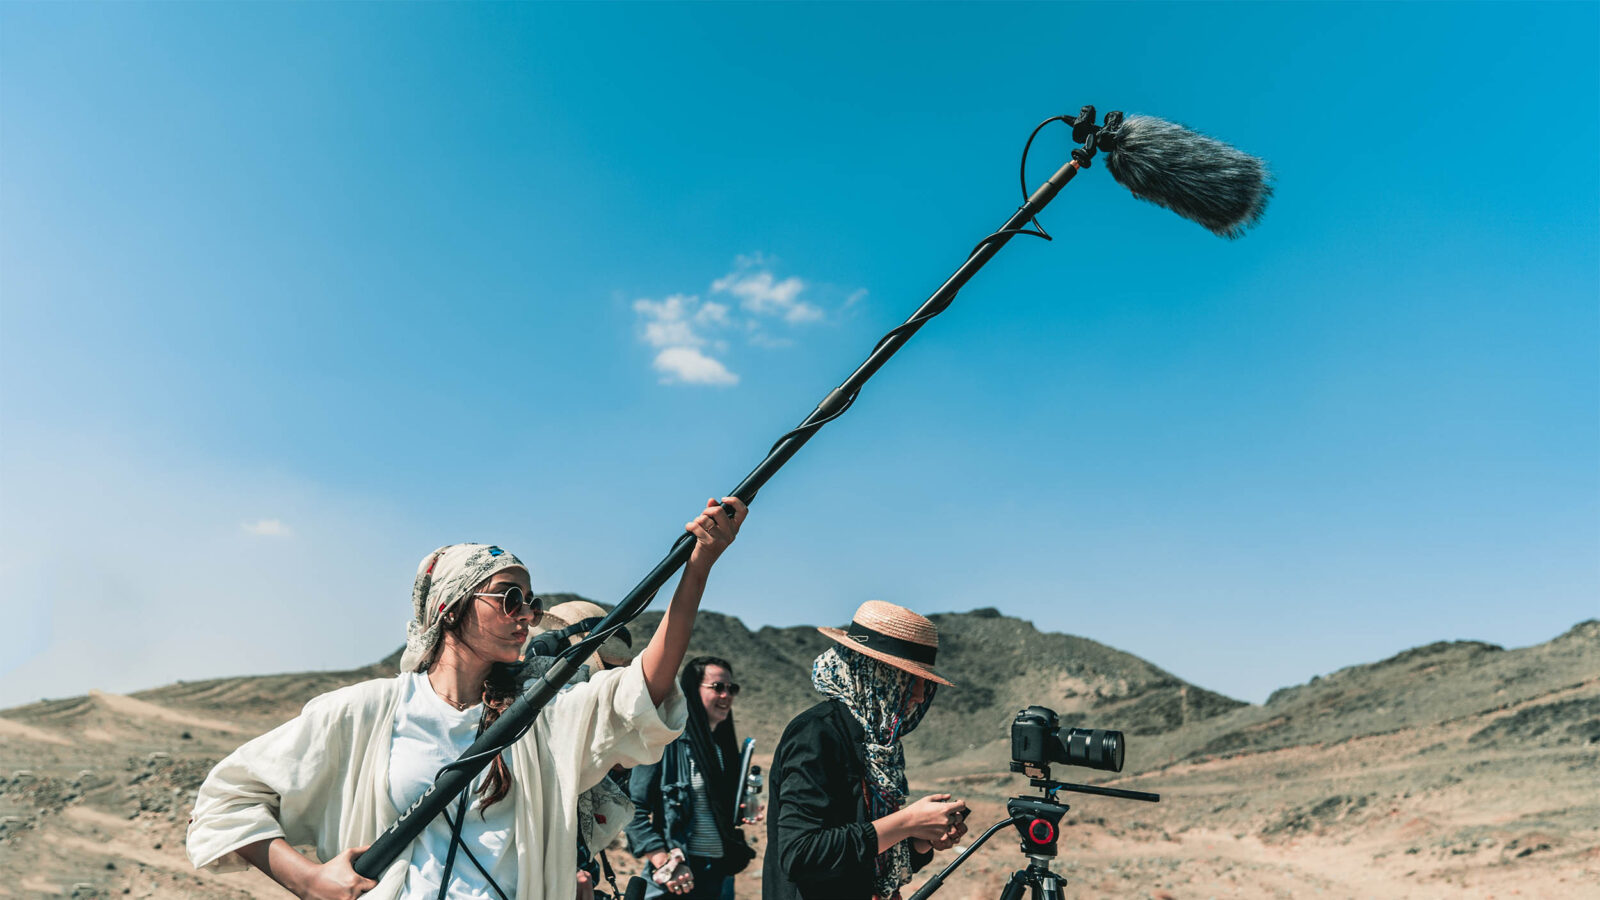 students filming in a desert using a camera and boom mic